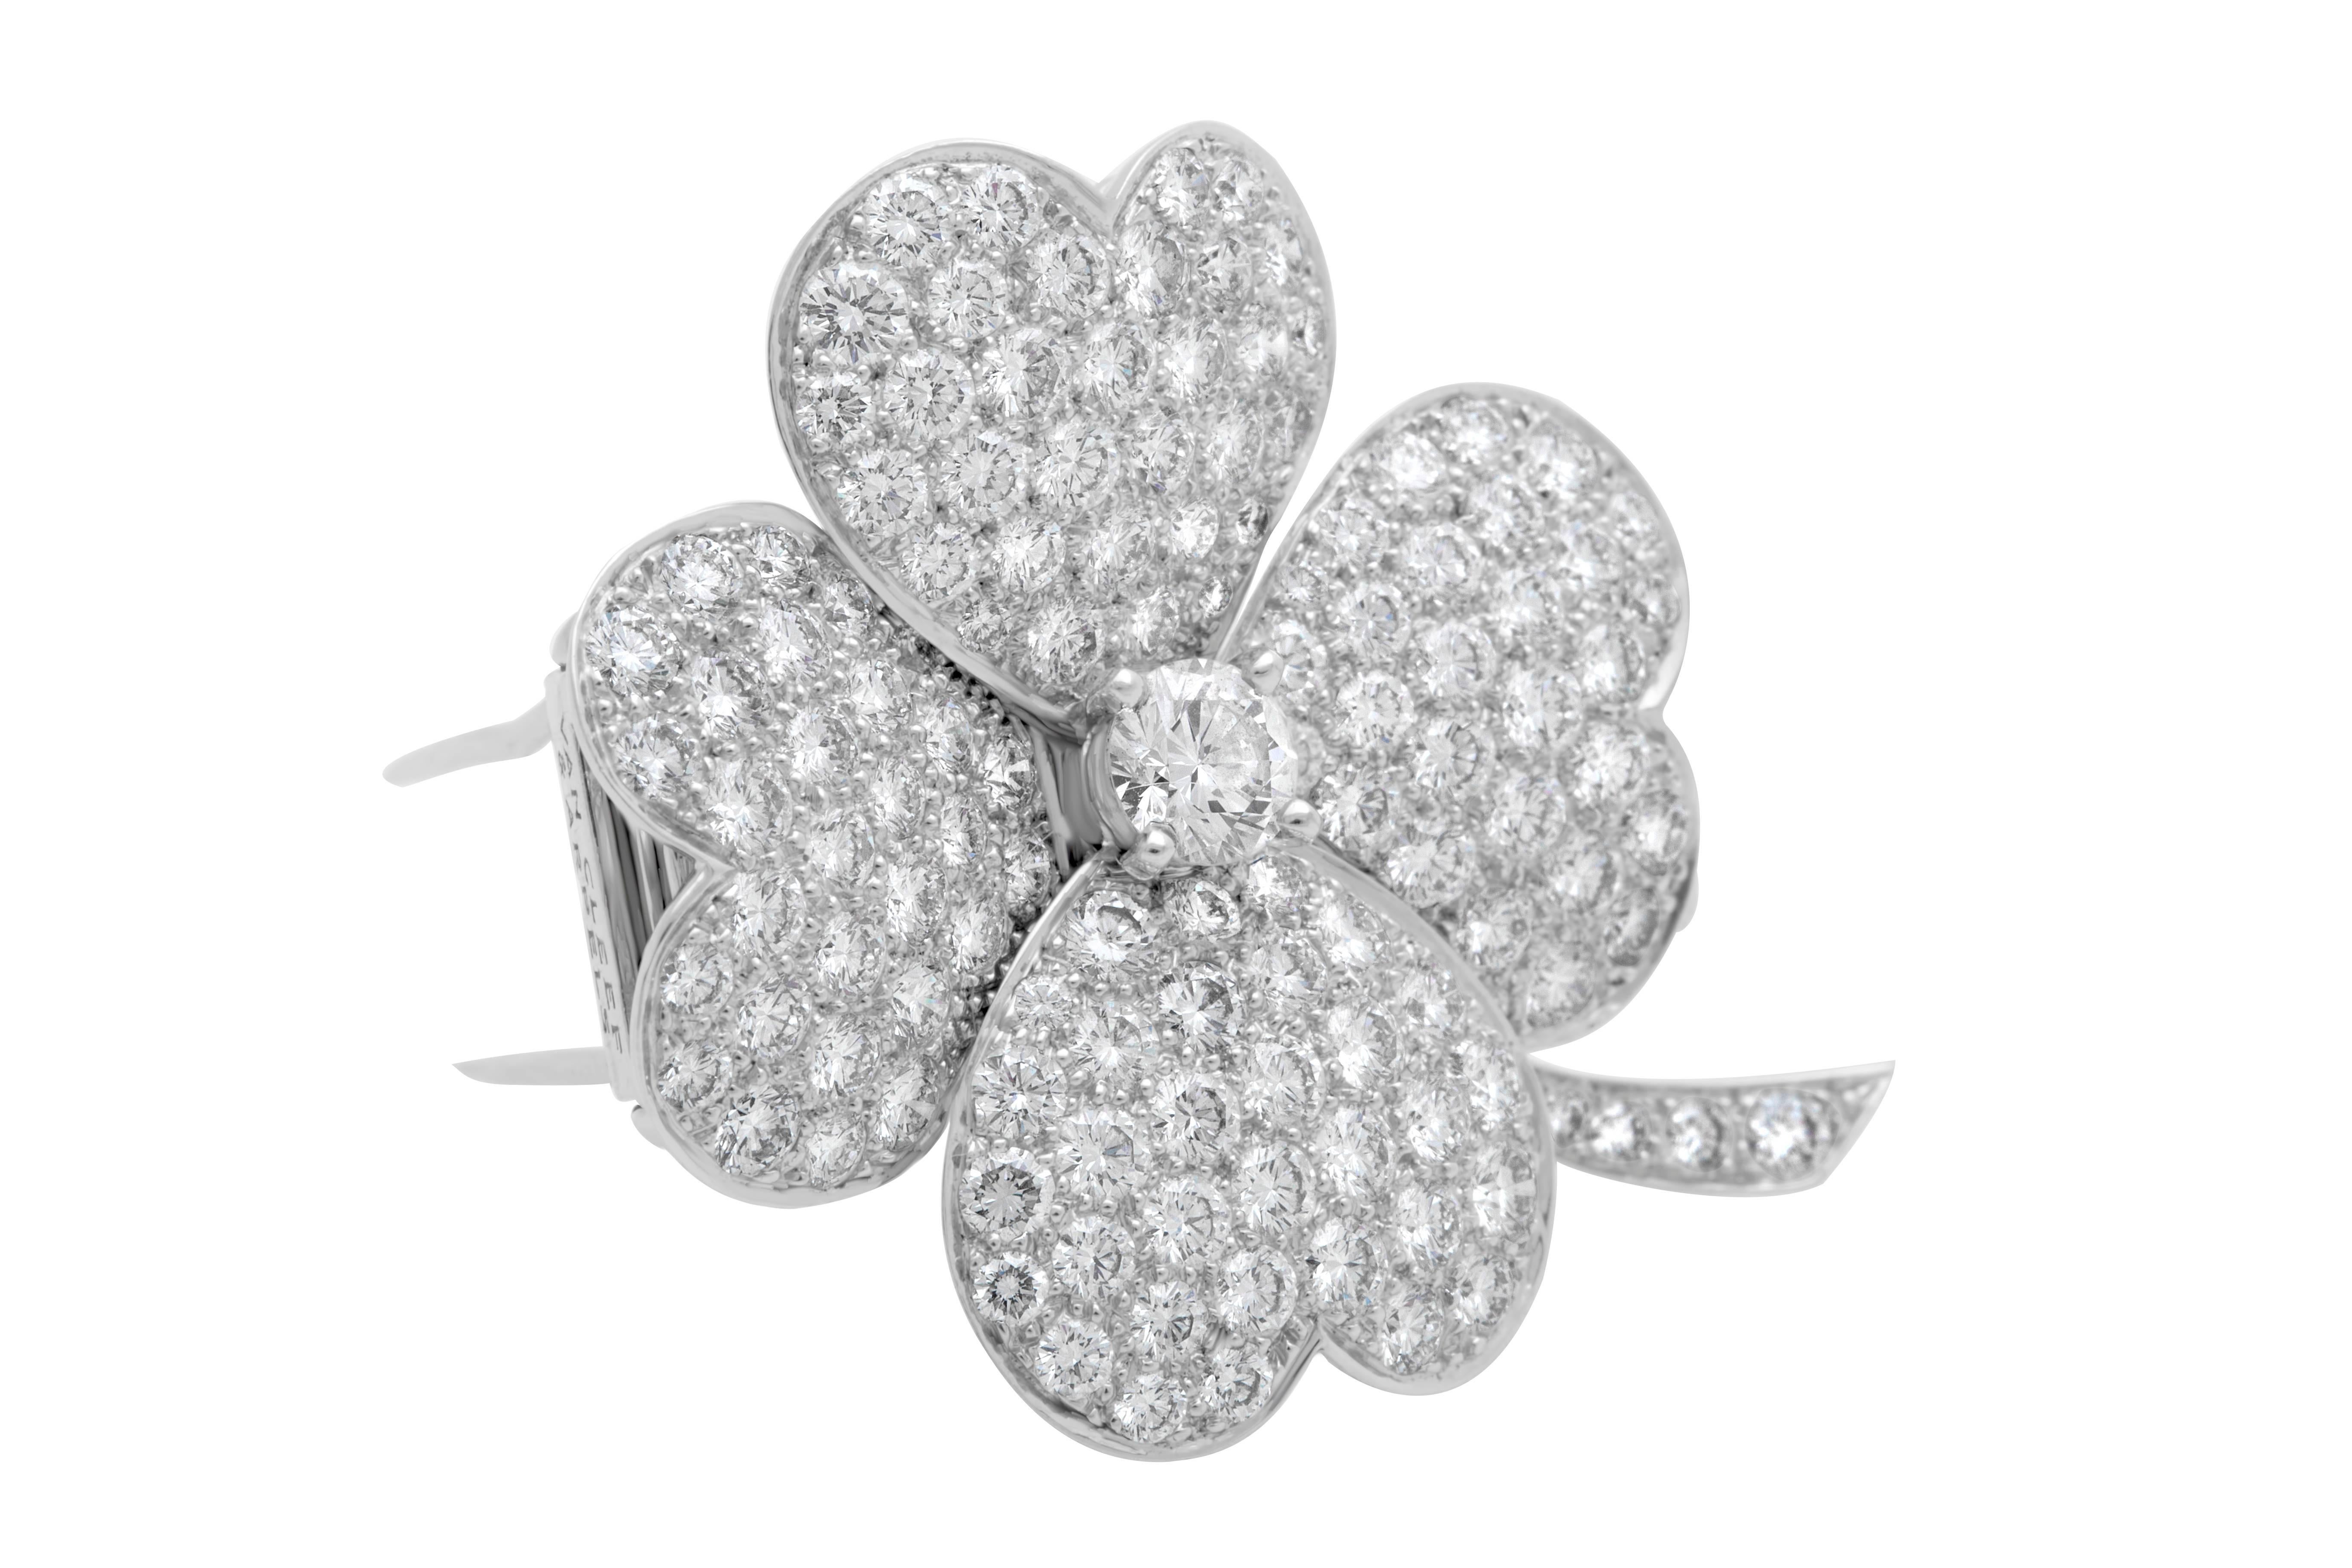 Classic Van Cleef & Arpels VCA Diamond Pave Very Large Model Cosmos Clip Pendant in 18K White Gold with approx. 0.50 carat round diamond center stone, Approx. 4.80 carat Diamond Pave Flower, Length 1.63